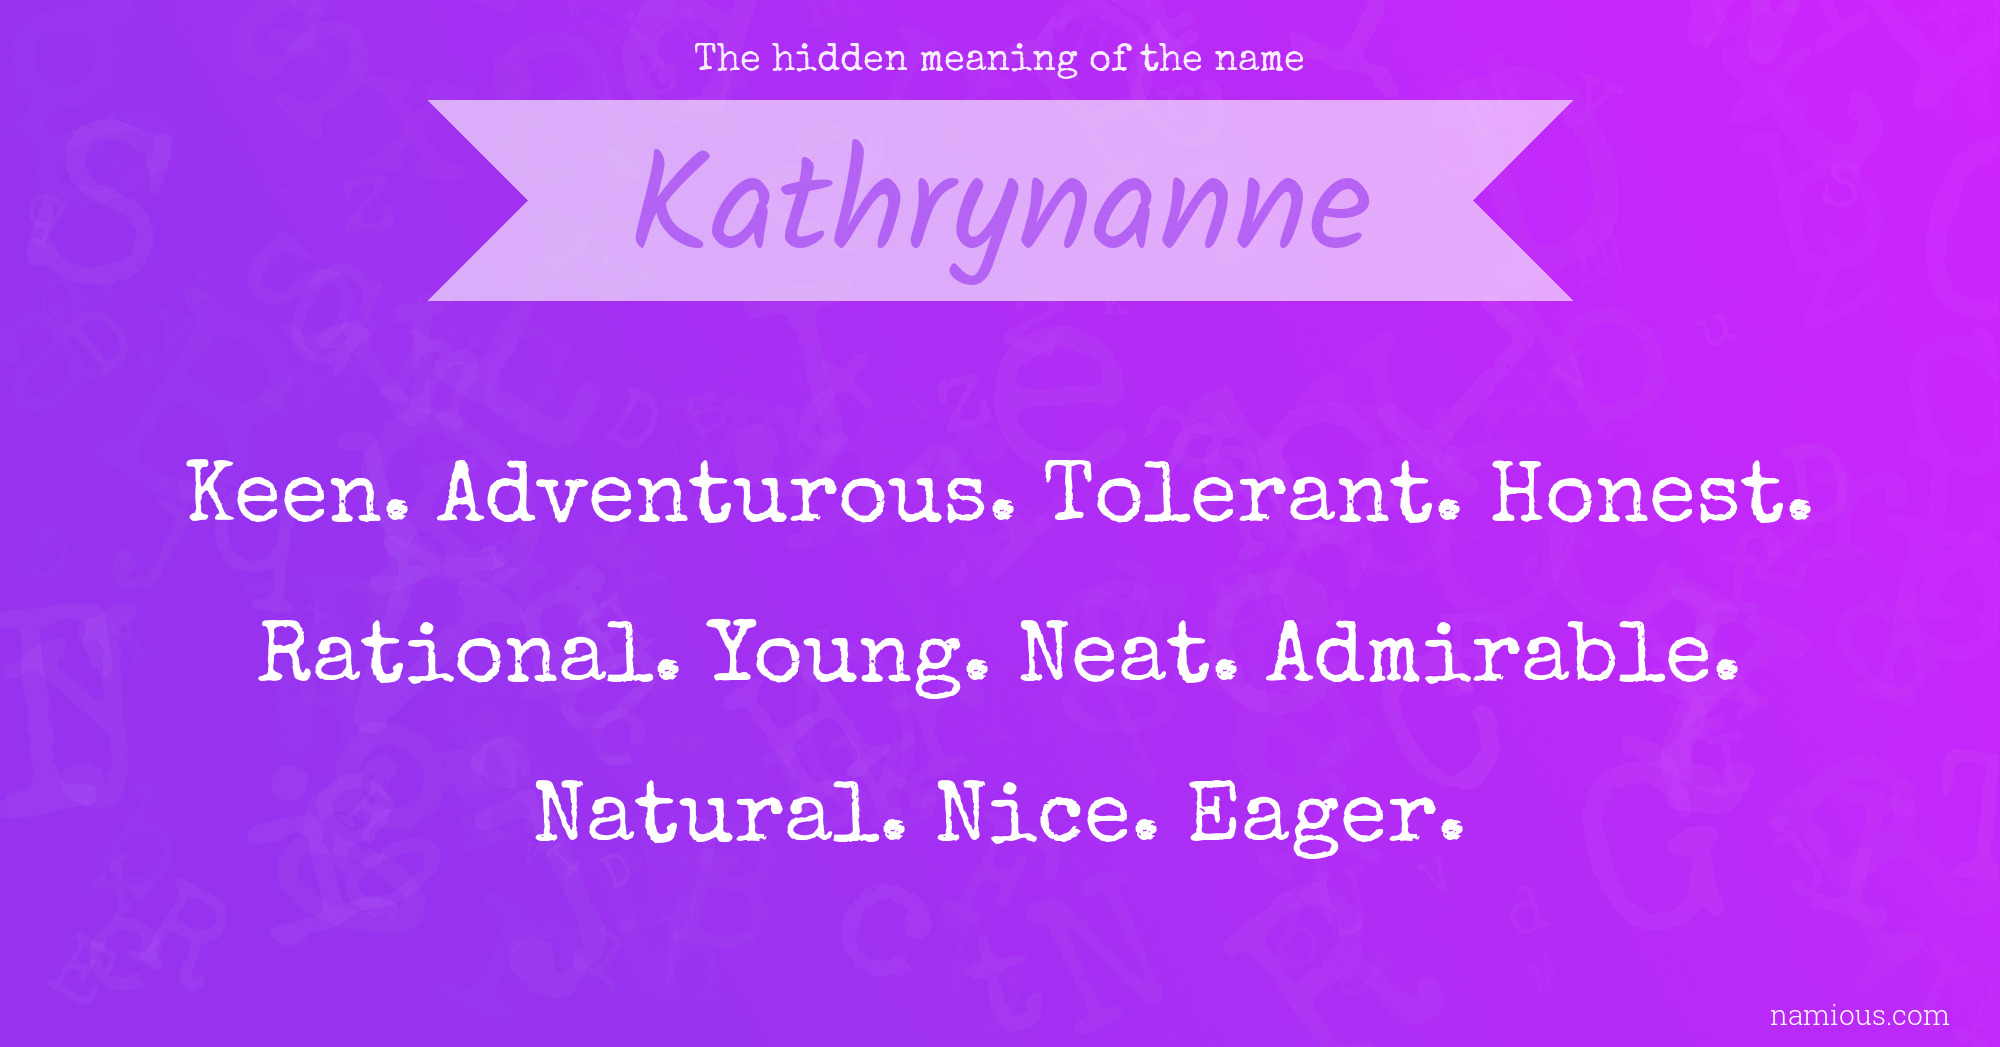 The hidden meaning of the name Kathrynanne